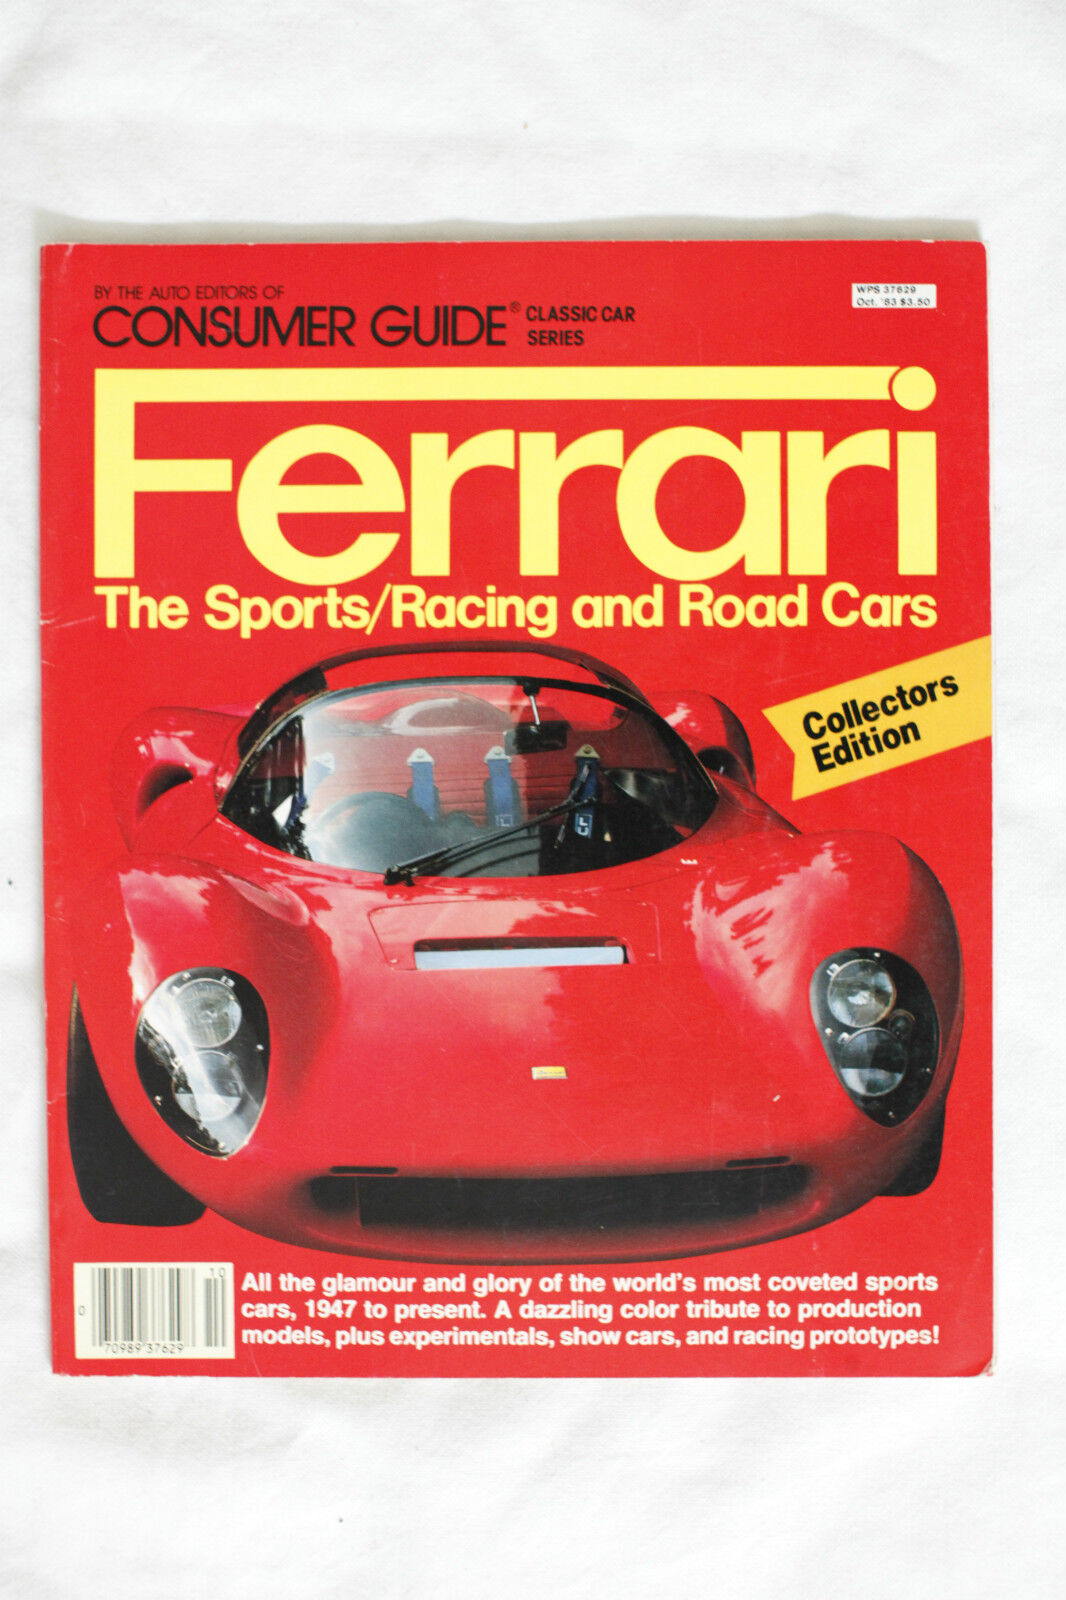 FERRARI - The sports/Racing and Road Cars - Consumer Guide 1983